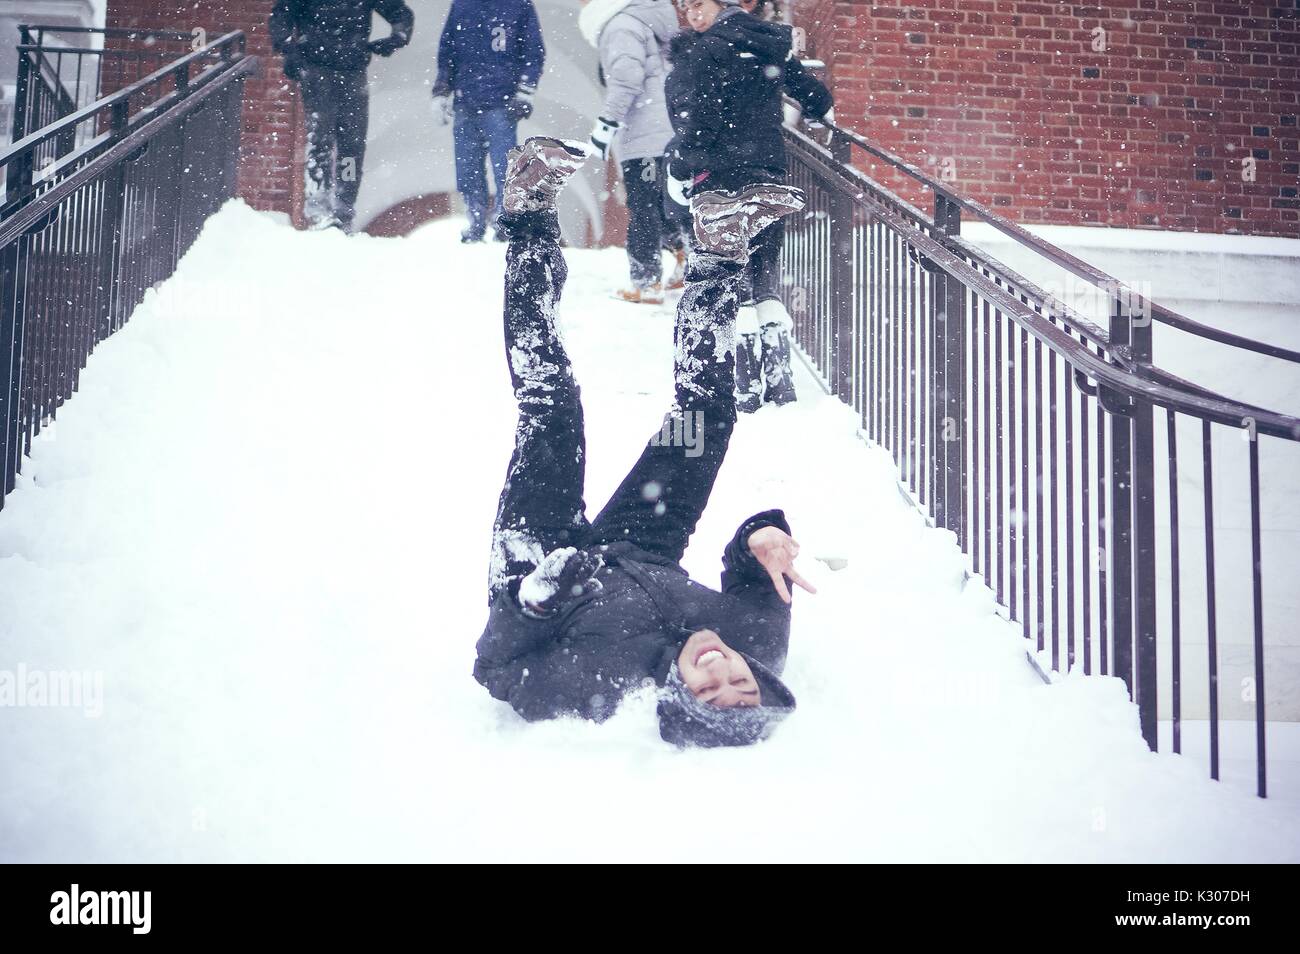 A student sits in the snow with legs in the air after sliding down the snowy staircase, while other students dressed in snow gear stand at the top of the staircase, on a snow day at Johns Hopkins University, Baltimore, Maryland, 2016. Stock Photo